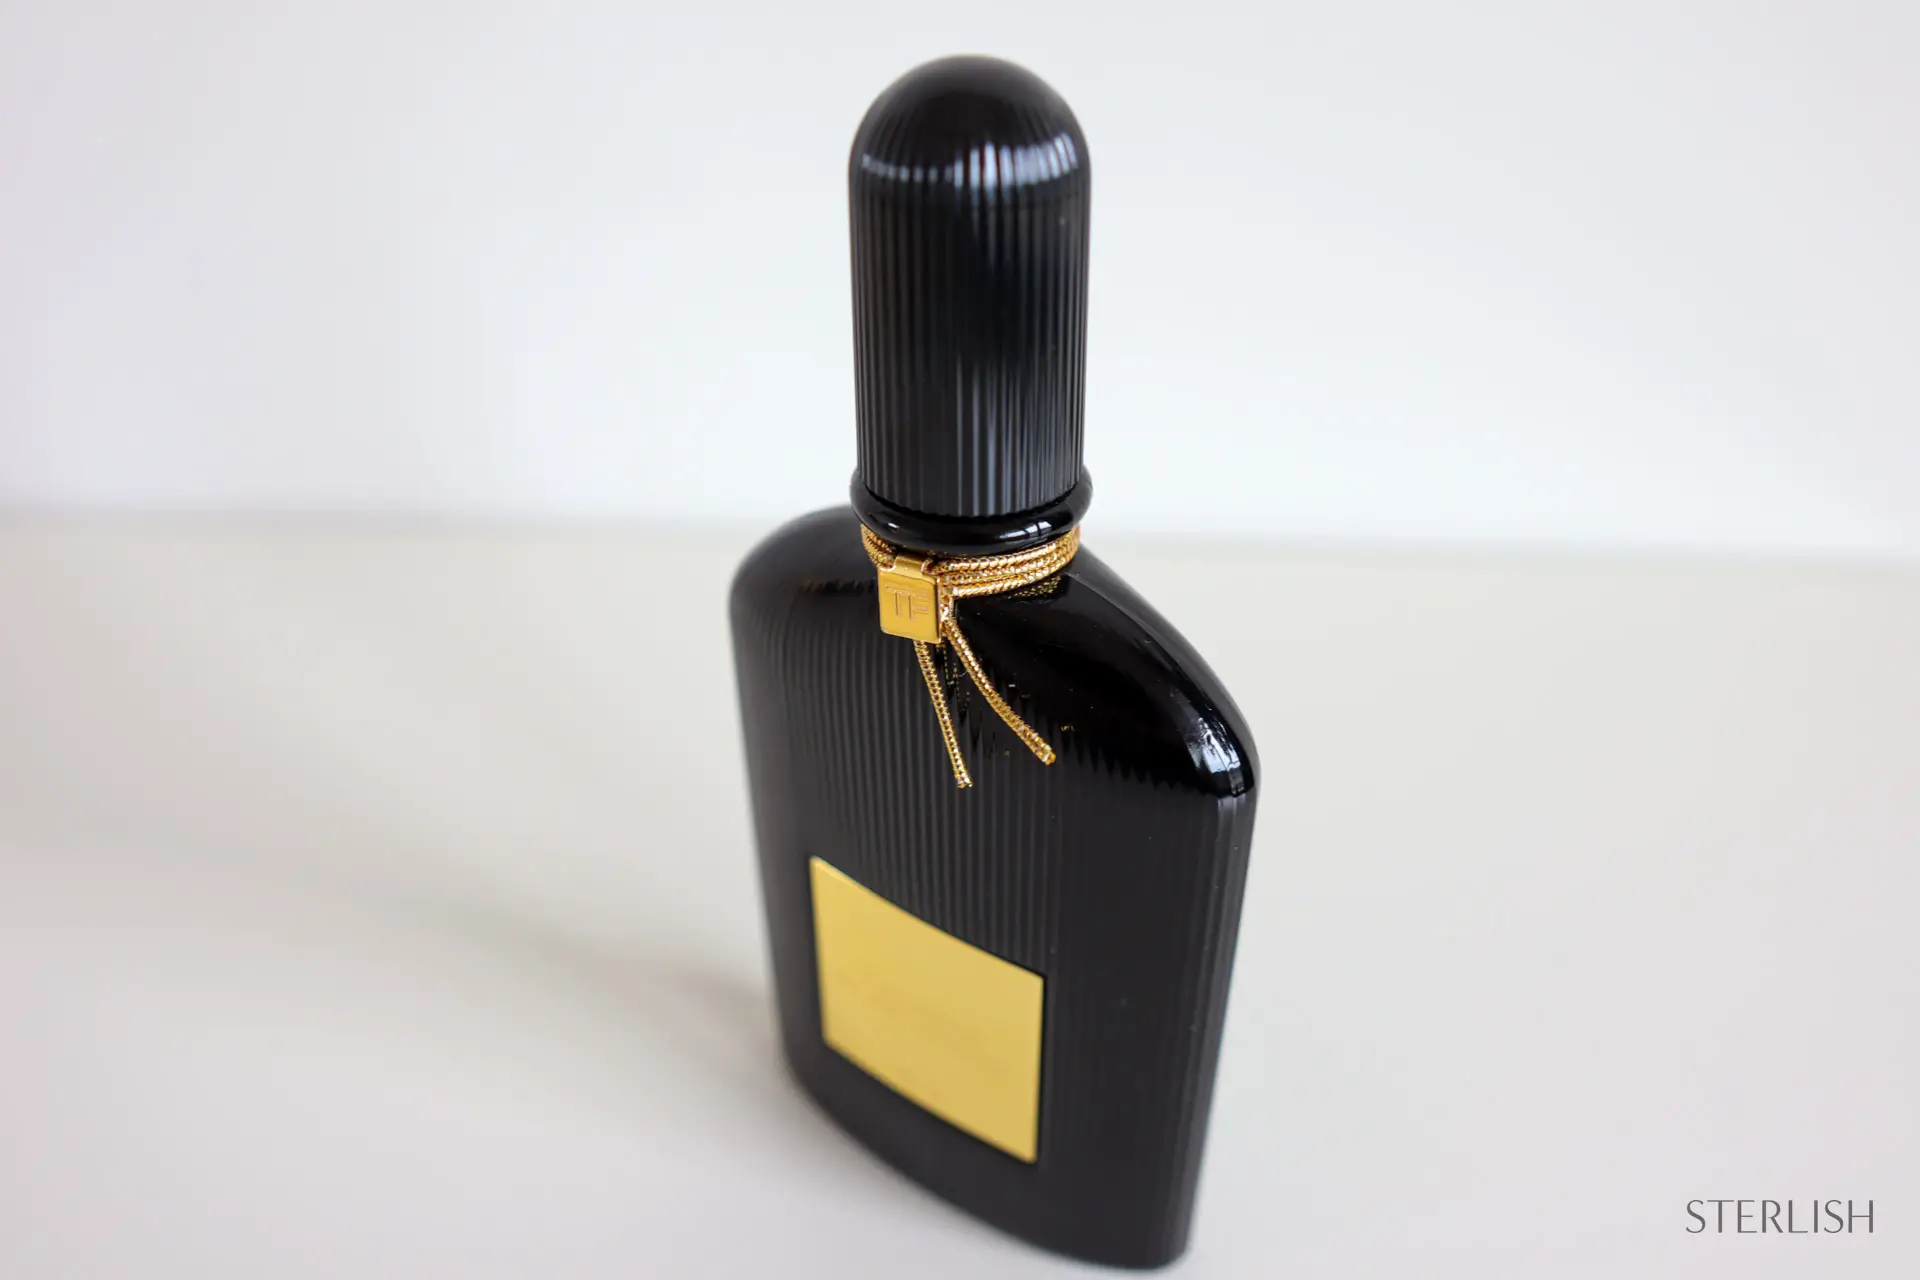 Arriba 101+ imagen tom ford black orchid trial size - Abzlocal.mx